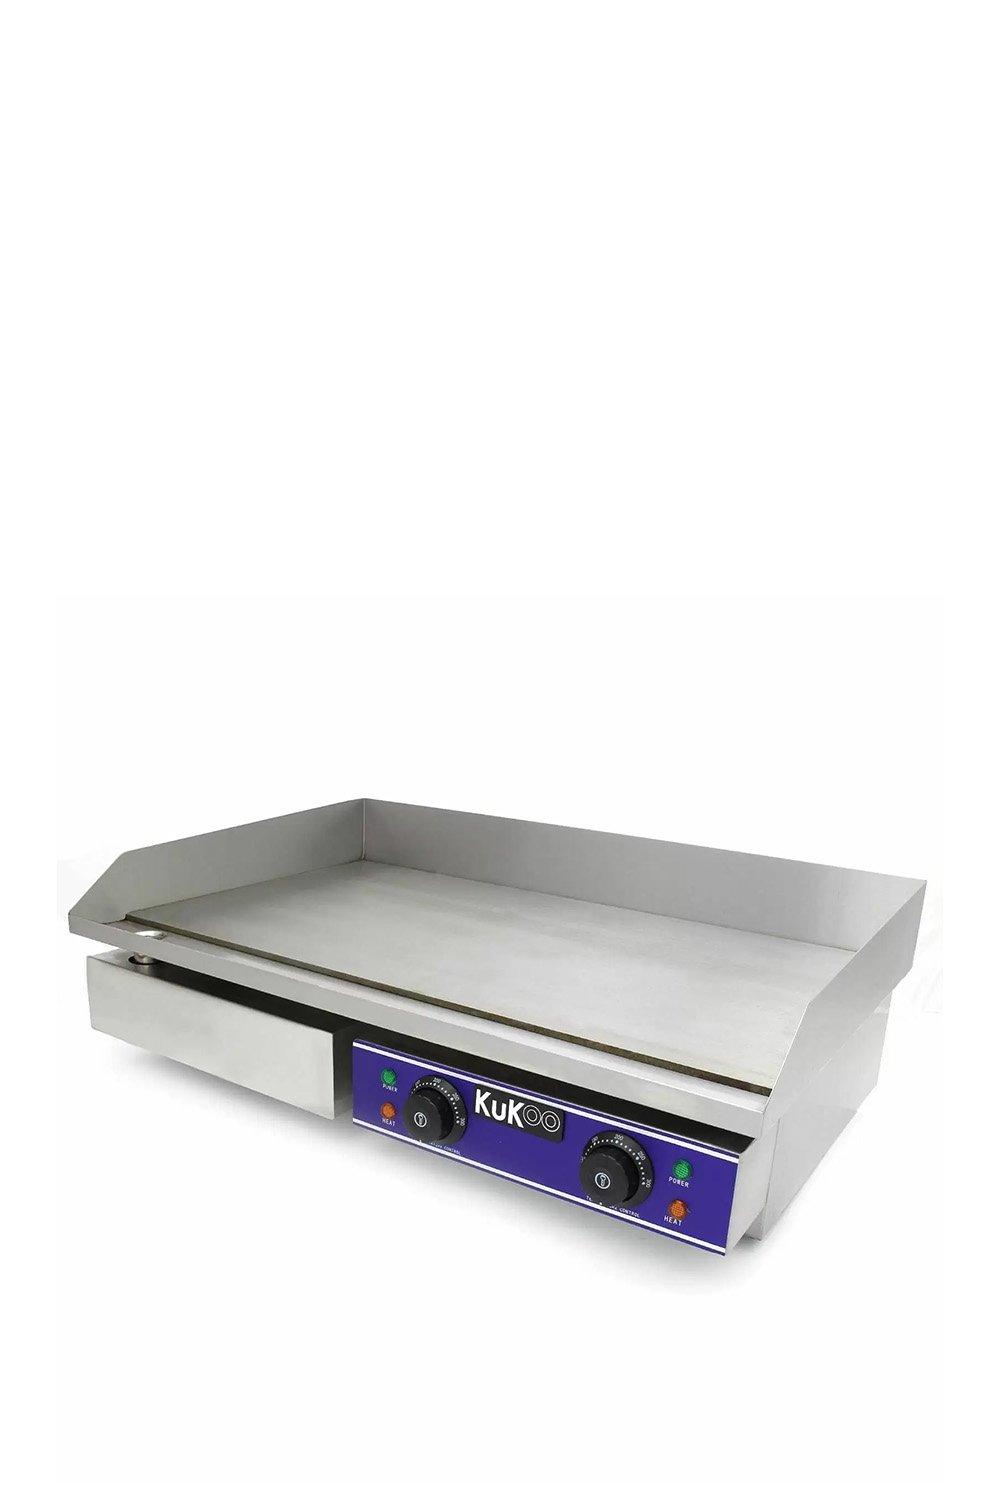 Kukoo KuKoo 70cm Wide Electric Griddle|silver